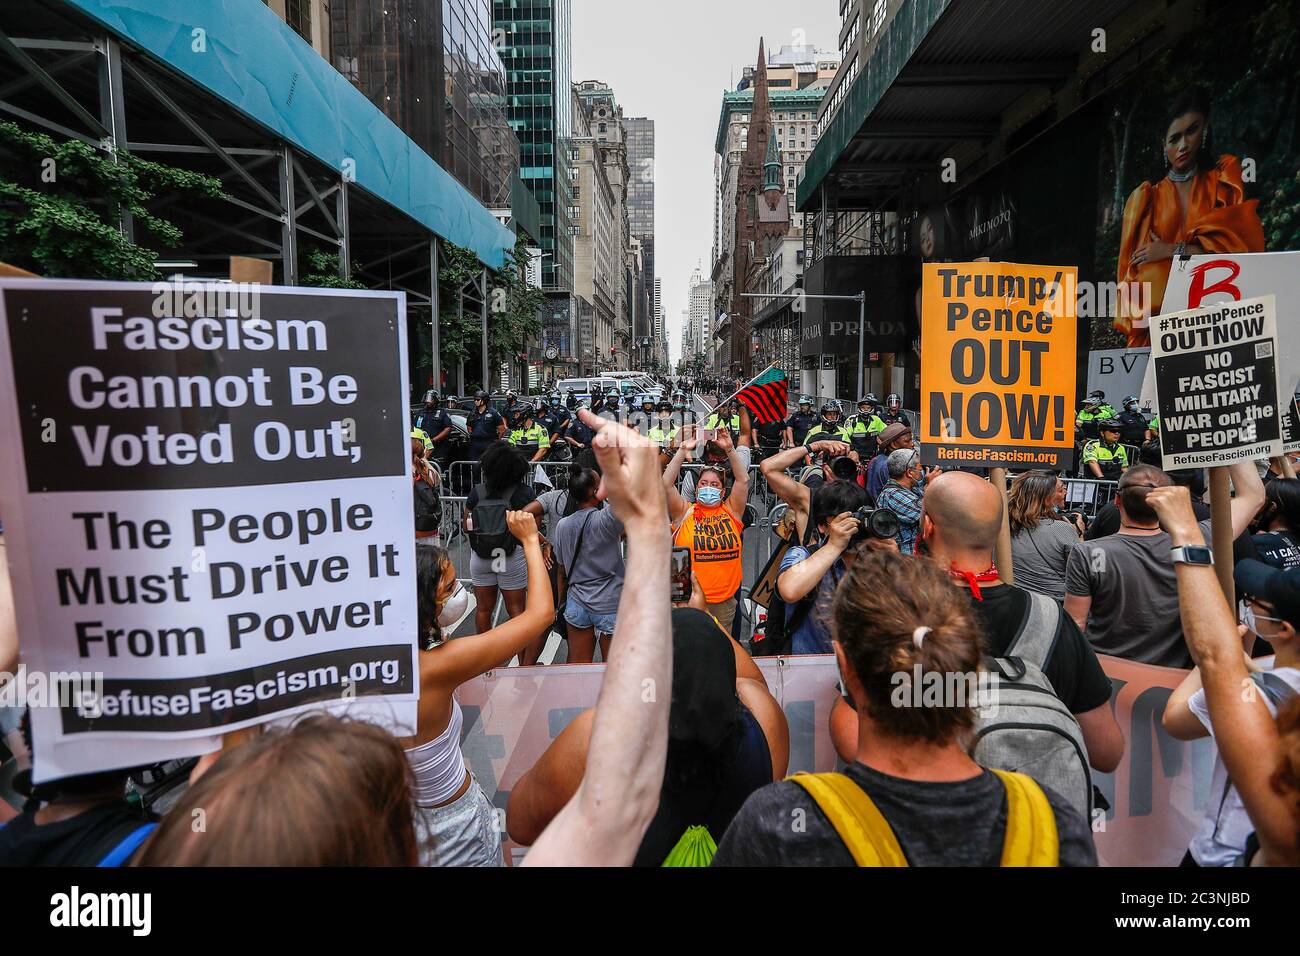 Protesters hold placards during the demonstration. Hundredths demonstrate in New York against President Trump's Fascist KKKAMPAIN and Black Lives Matter march on Juneteenth weekend. Demonstrators continue to march against police brutality and racial injustice across America. Stock Photo